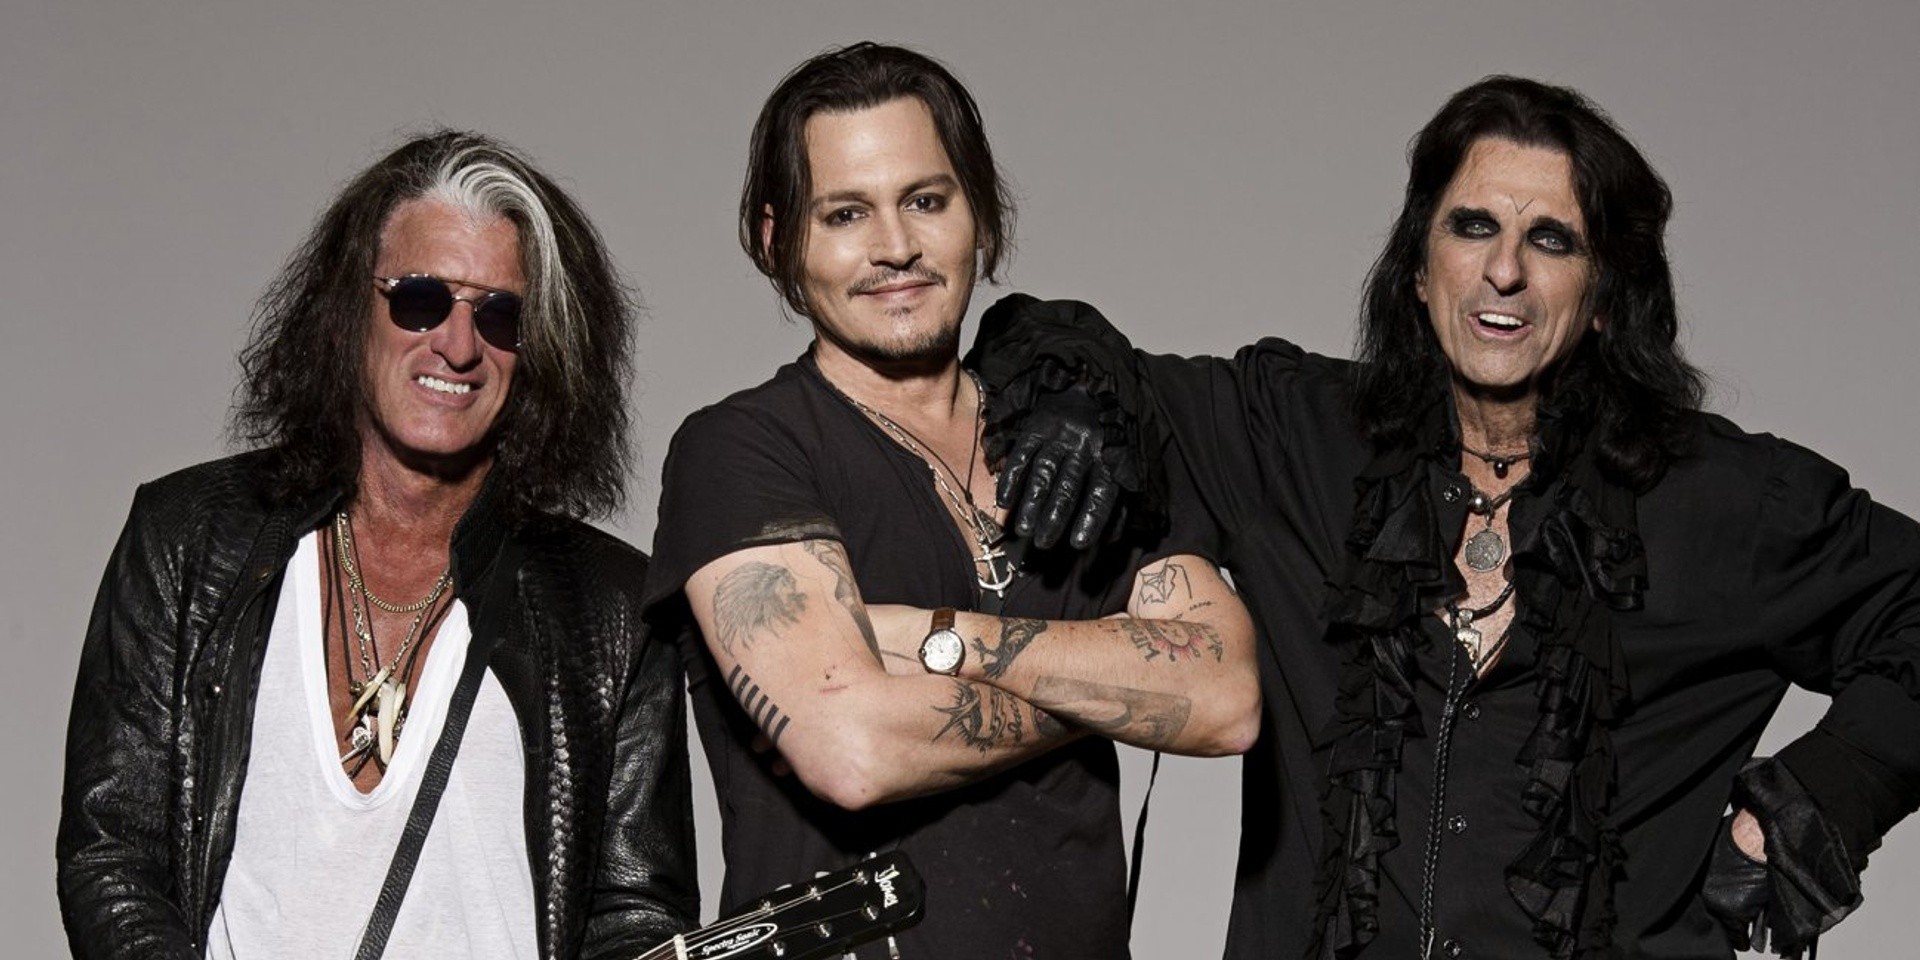 Hollywood Vampires (Alice Cooper, Johnny Depp, Joe Perry) announce upcoming album Rise, release first single ‘Who’s Laughing Now?’ – listen